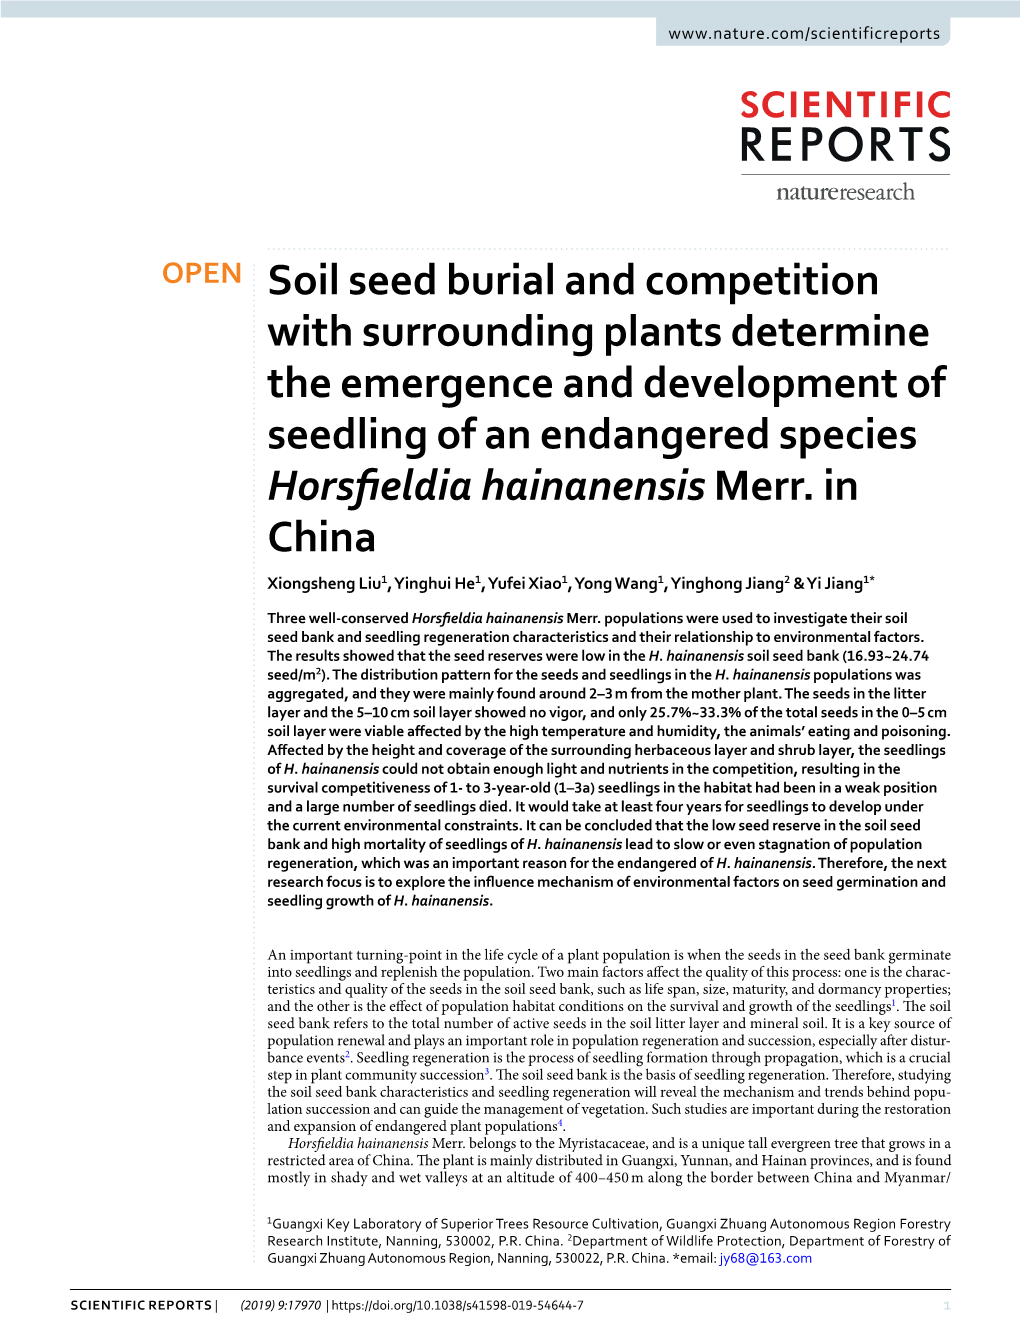 Soil Seed Burial and Competition with Surrounding Plants Determine the Emergence and Development of Seedling of an Endangered Species Horsfeldia Hainanensis Merr